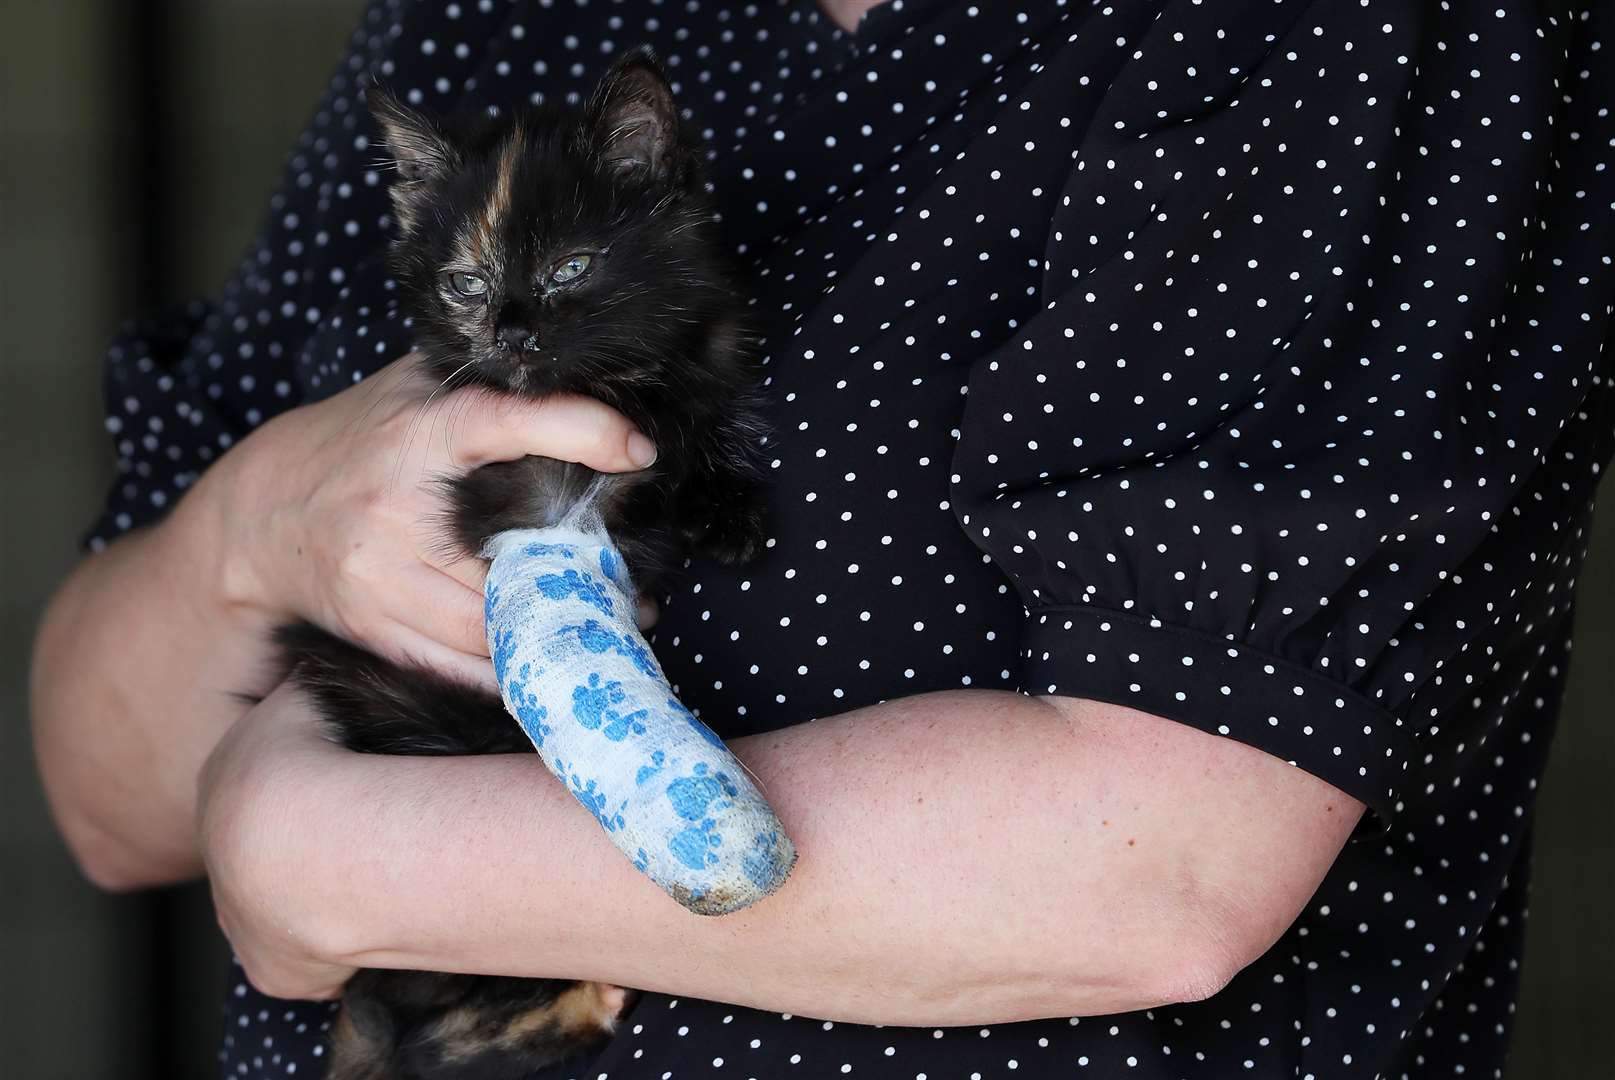 Shadow the kitten is undergoing treatment for an injured paw at the USPCA’s facility in Newry (Brian Lawless/PA)